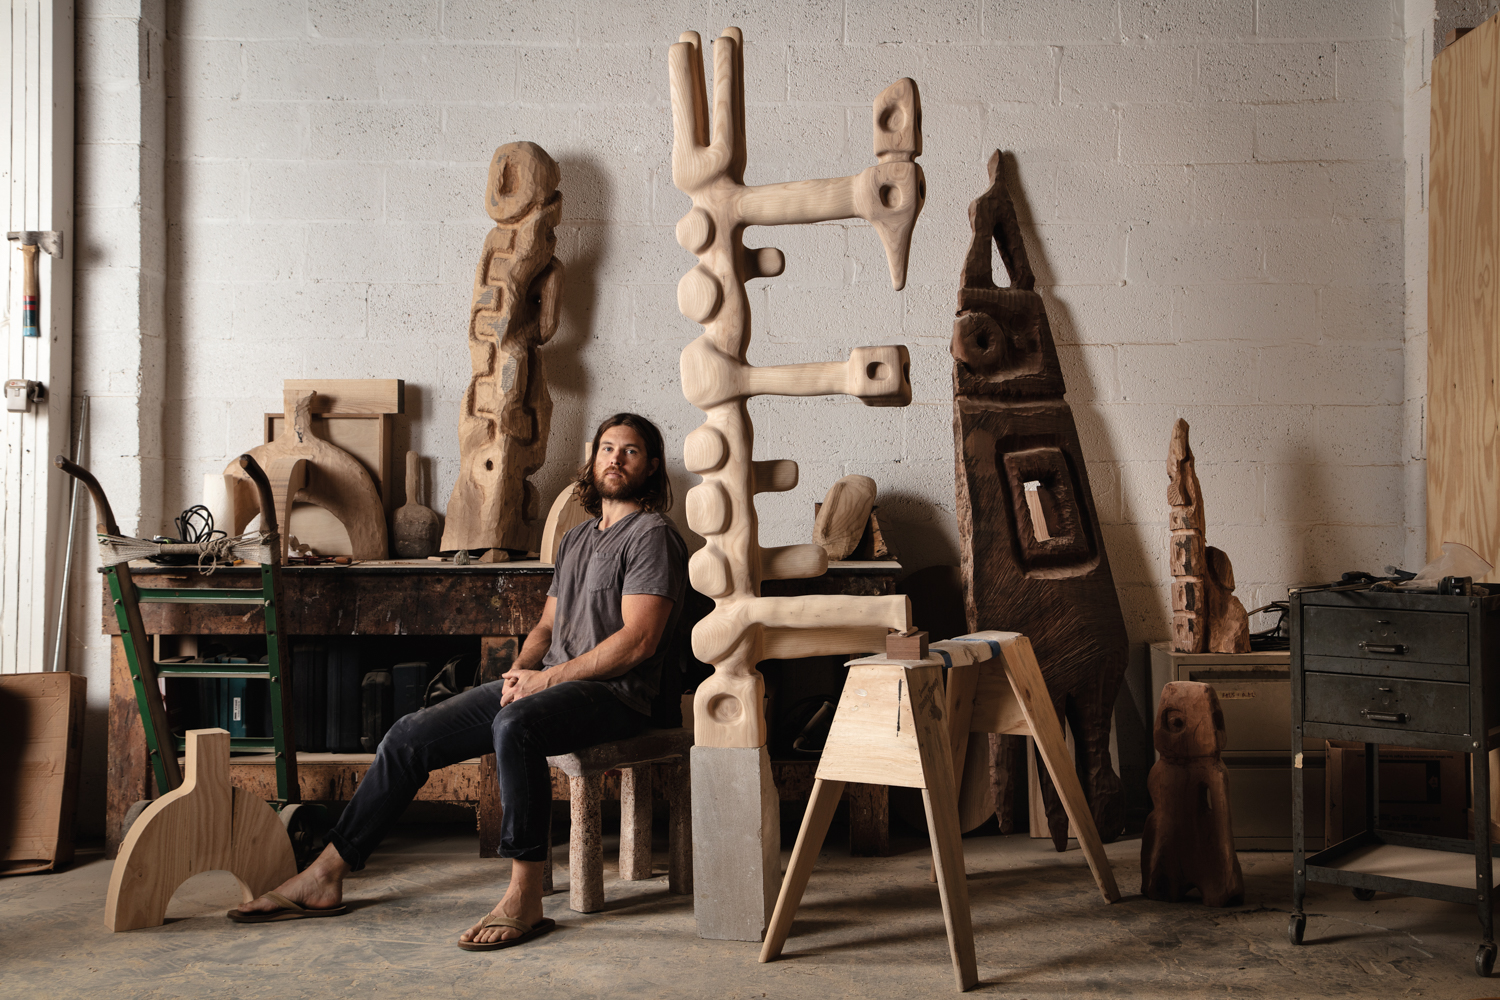 Sculptor Casey McCafferty in his studio surrounded by his work